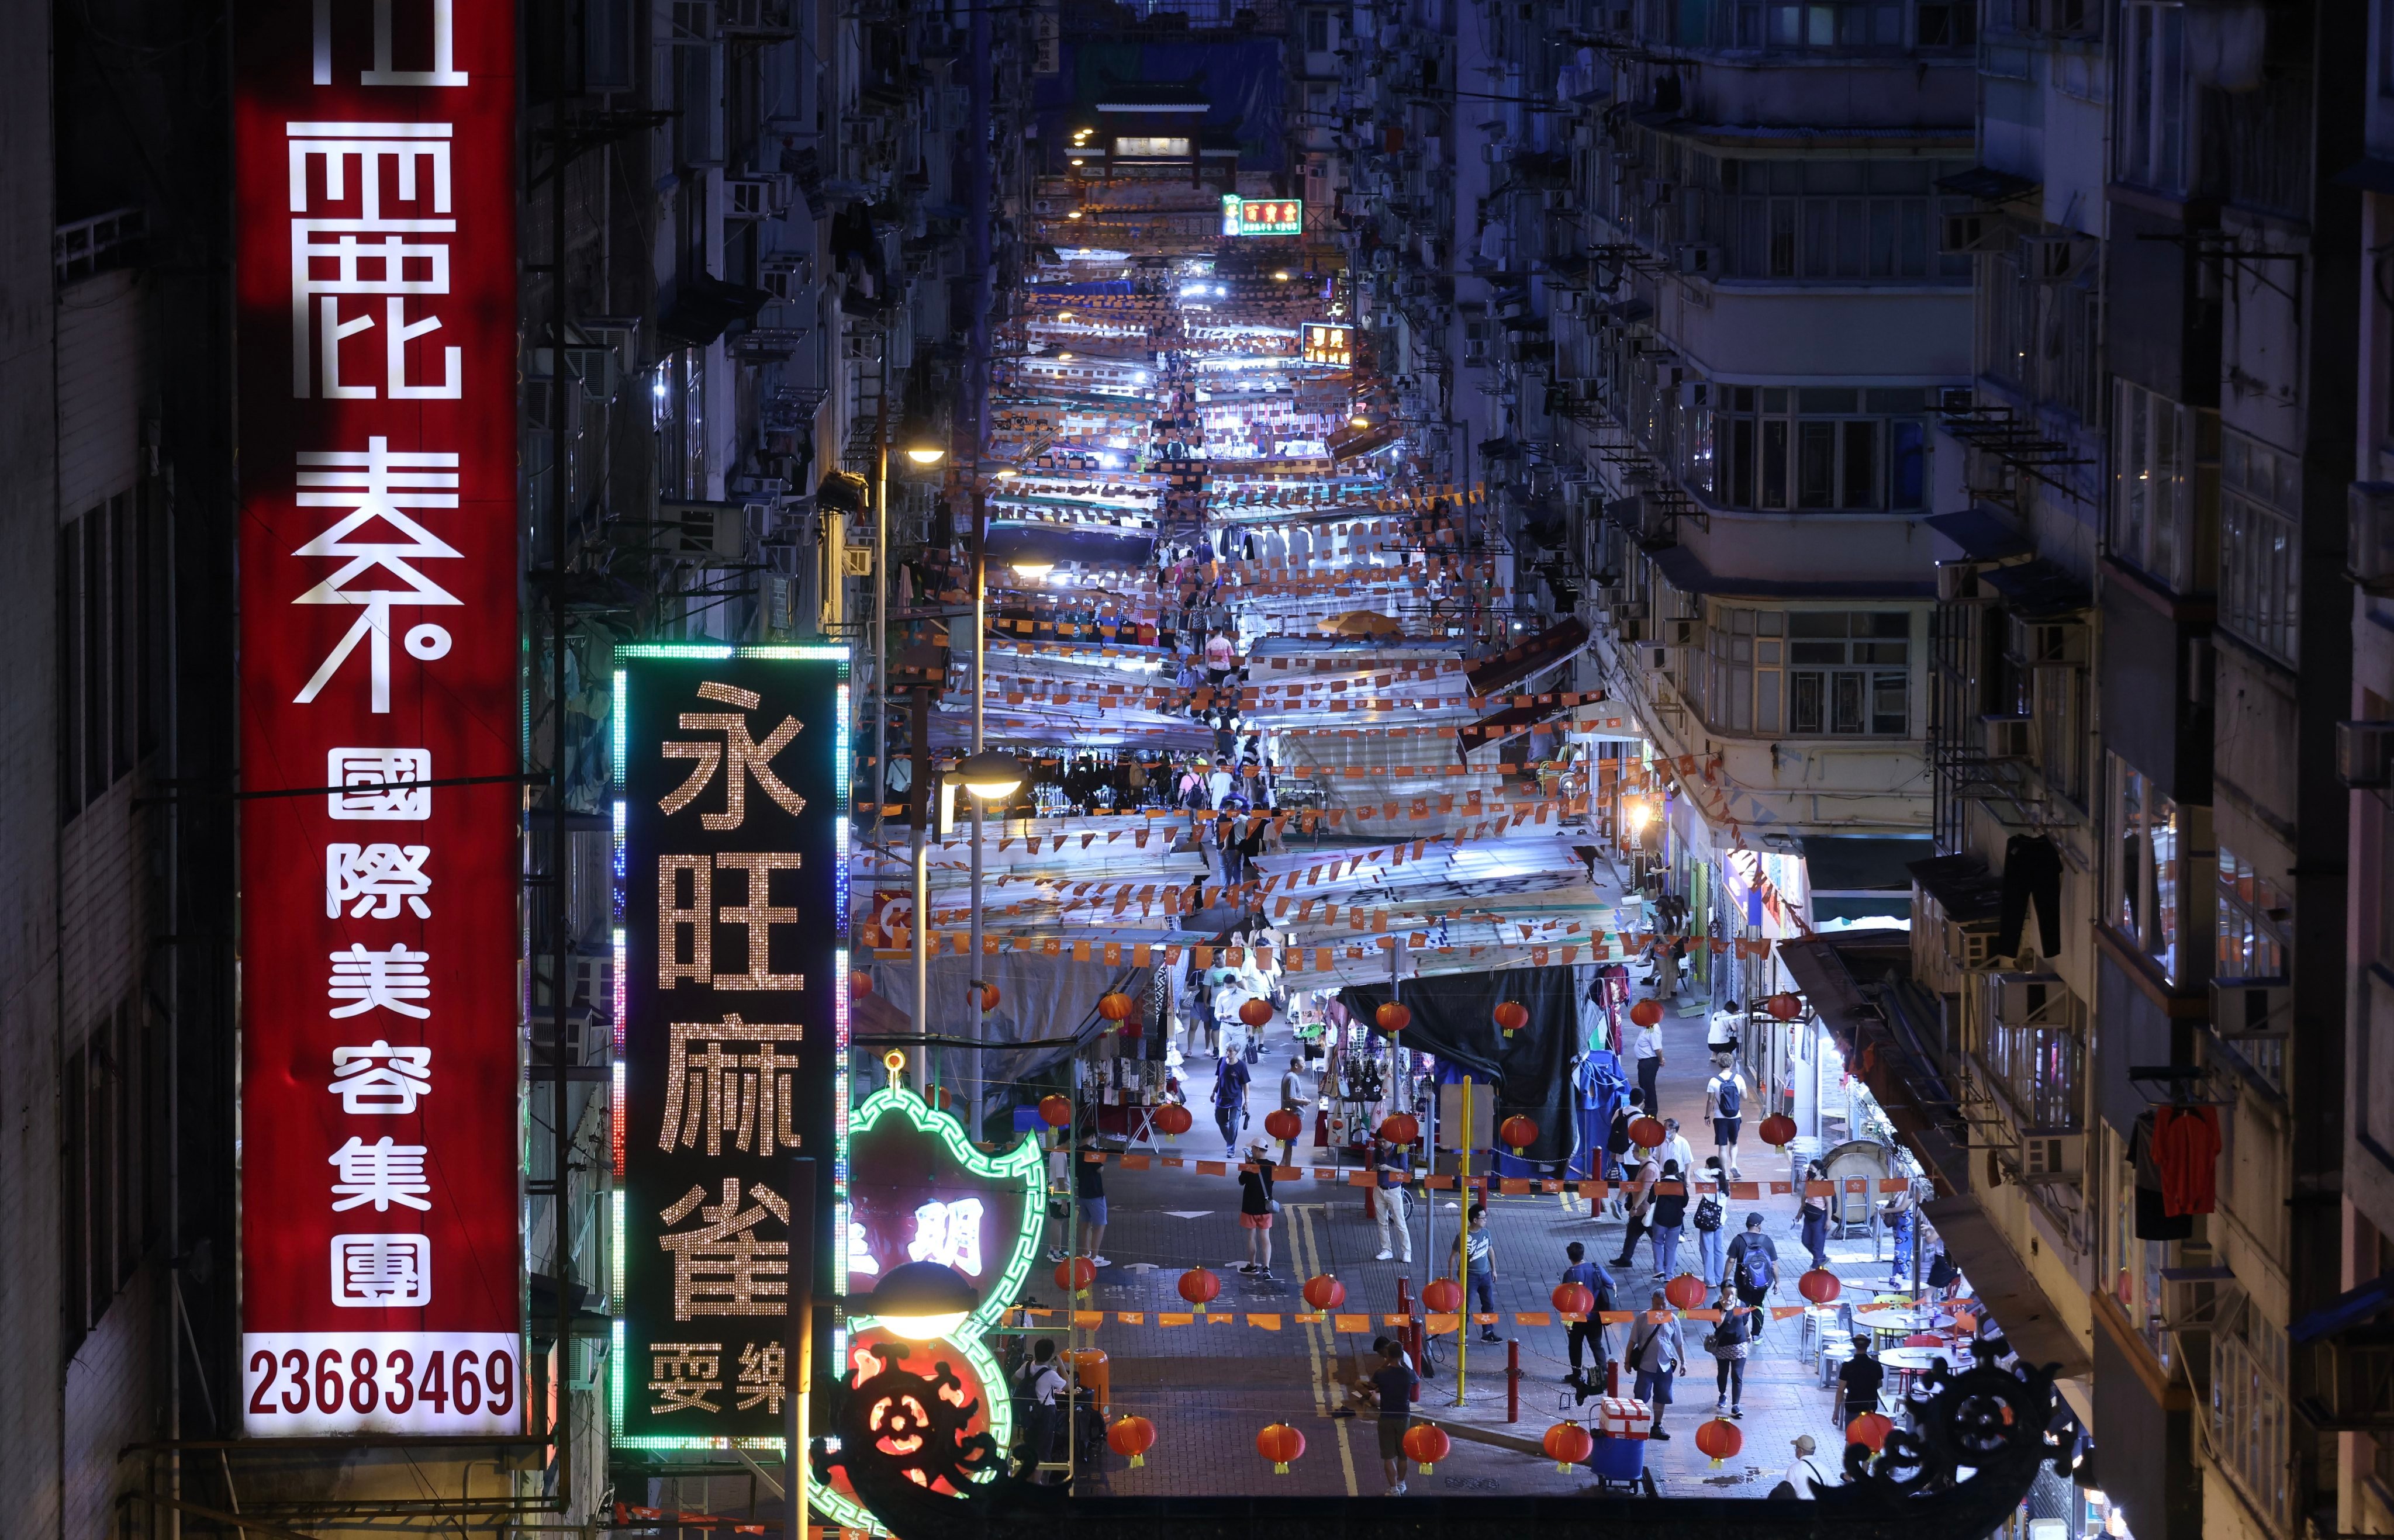 The night market on Temple Street is undergoing a revival effort. Photo: Jonathan Wong